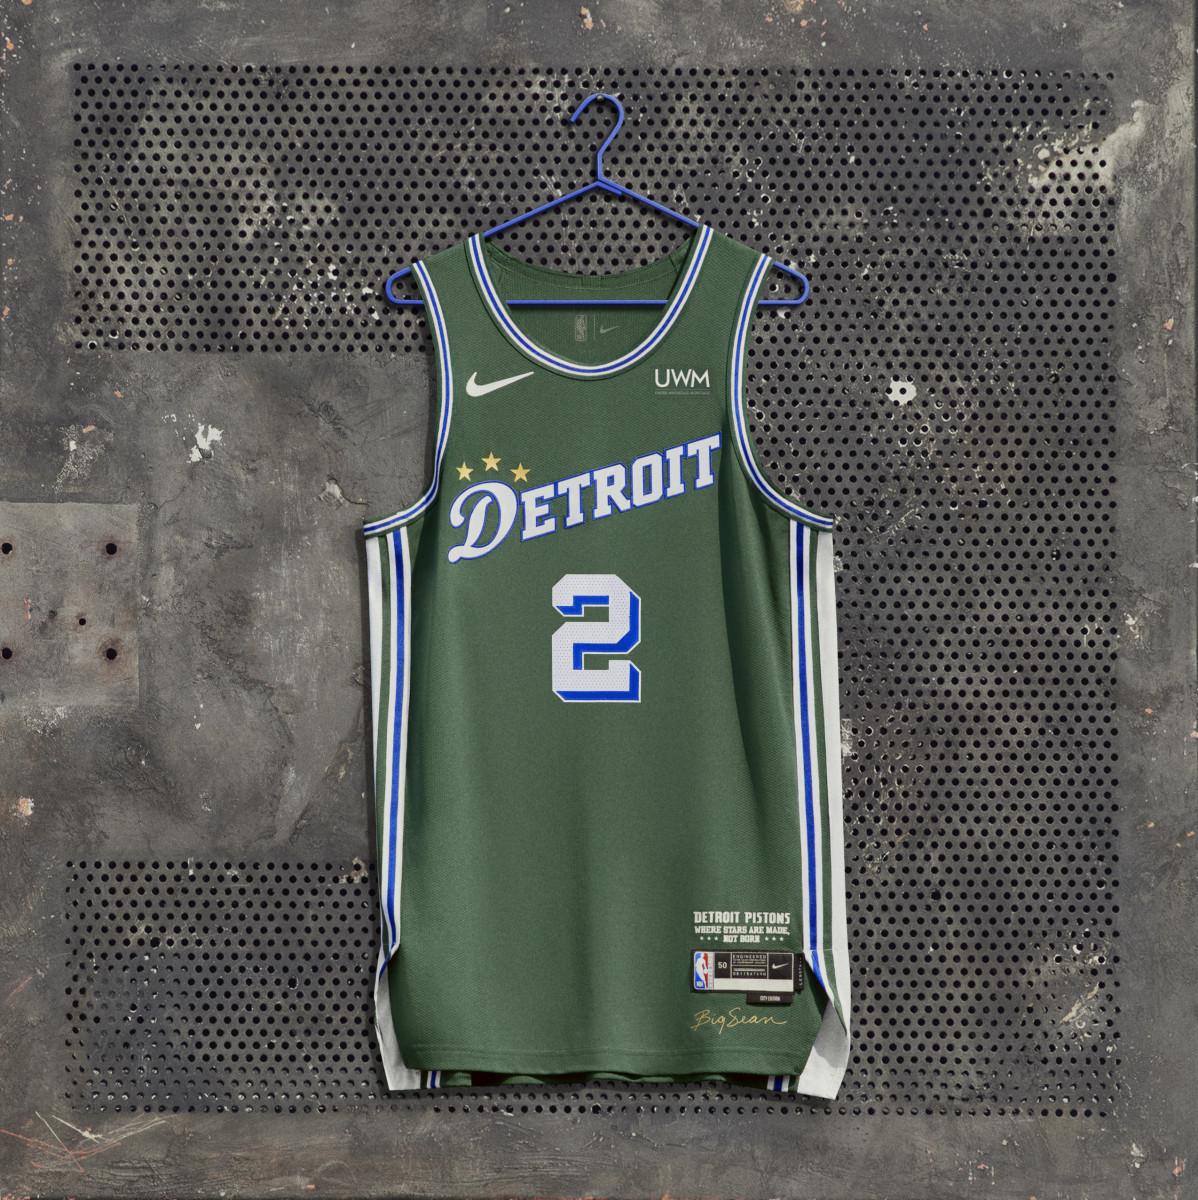 A Ranking of the 2021-22 NBA City Edition Jerseys – The Rangeview